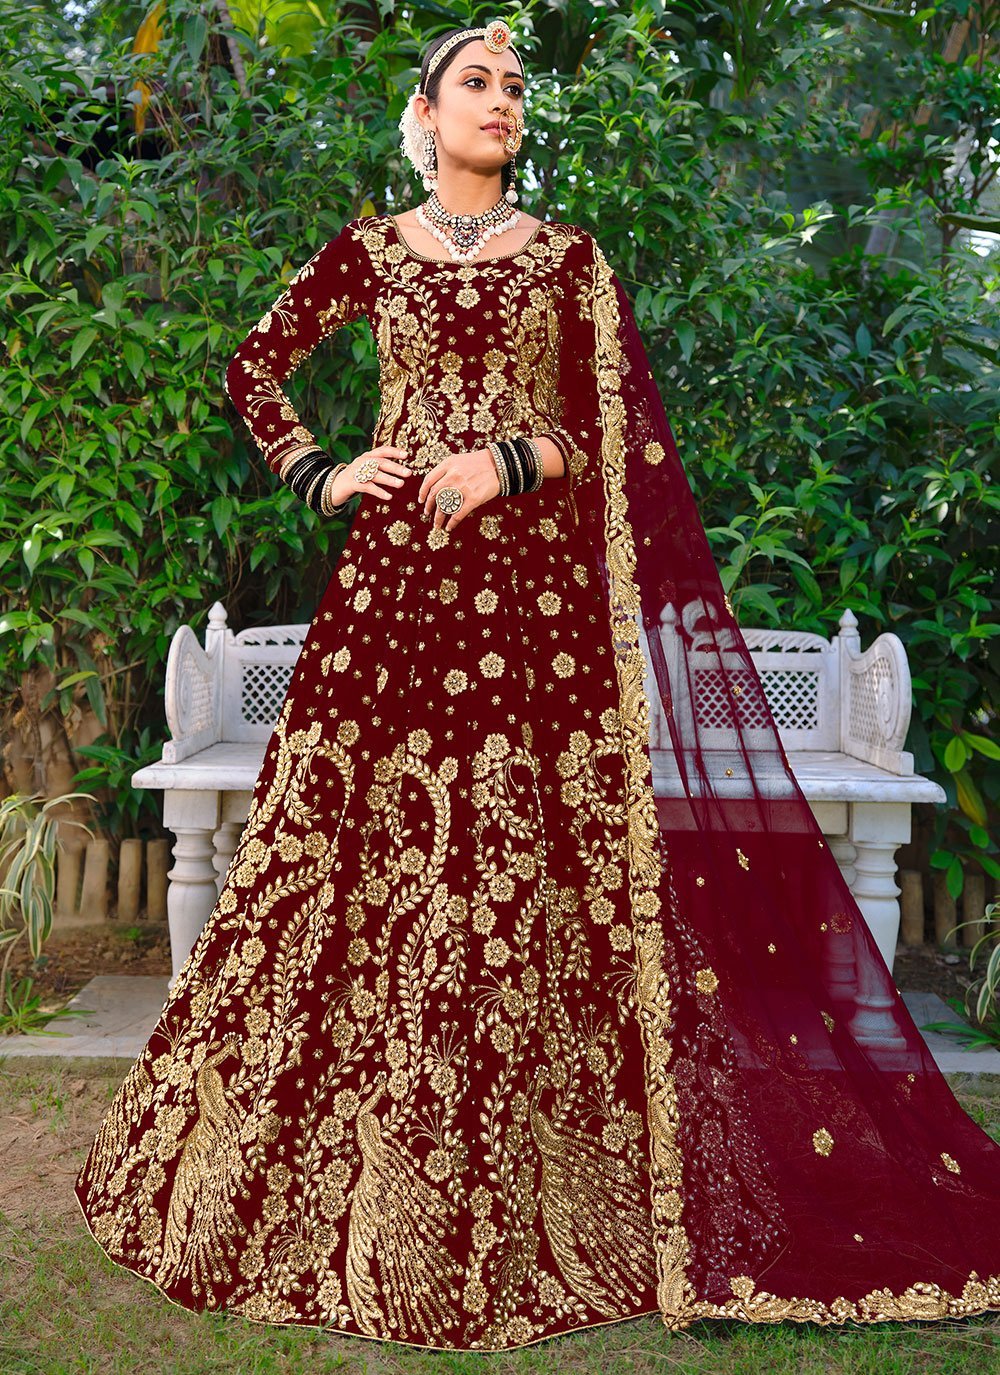 Search results for: 'wine wedding lehenga'